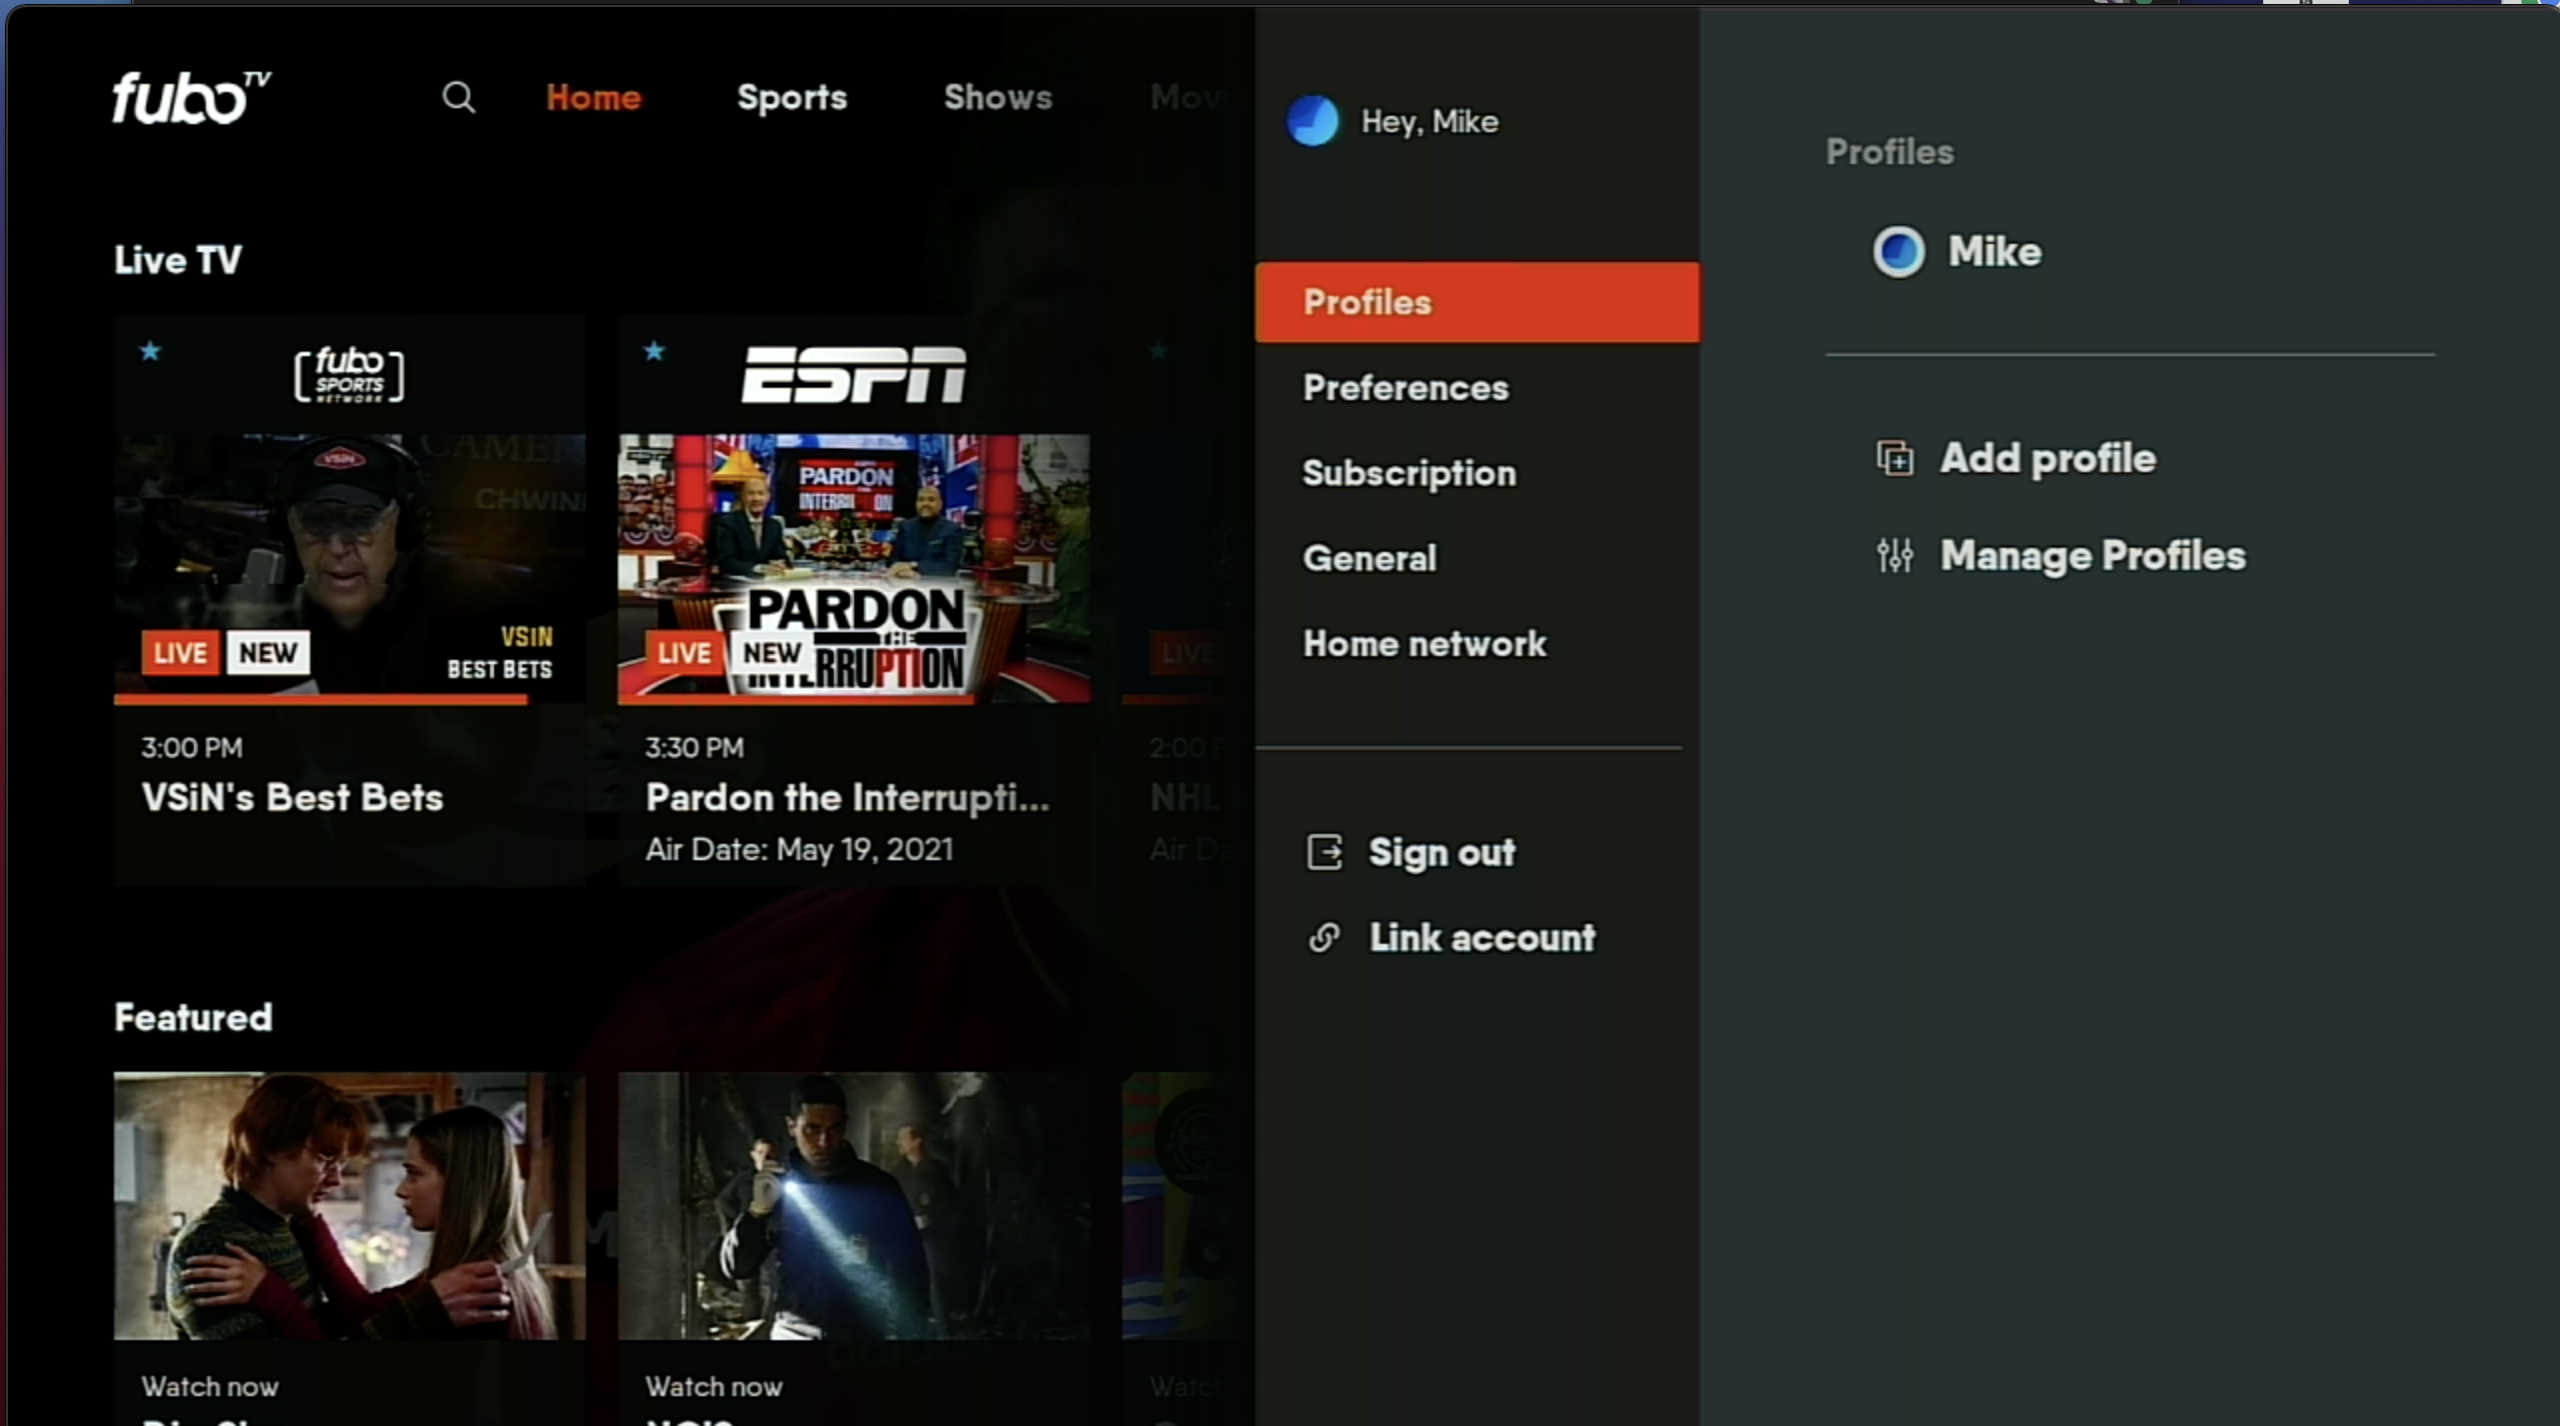 SETTINGS screen for the FuboTV app on Roku with PROFILES tab highlighted